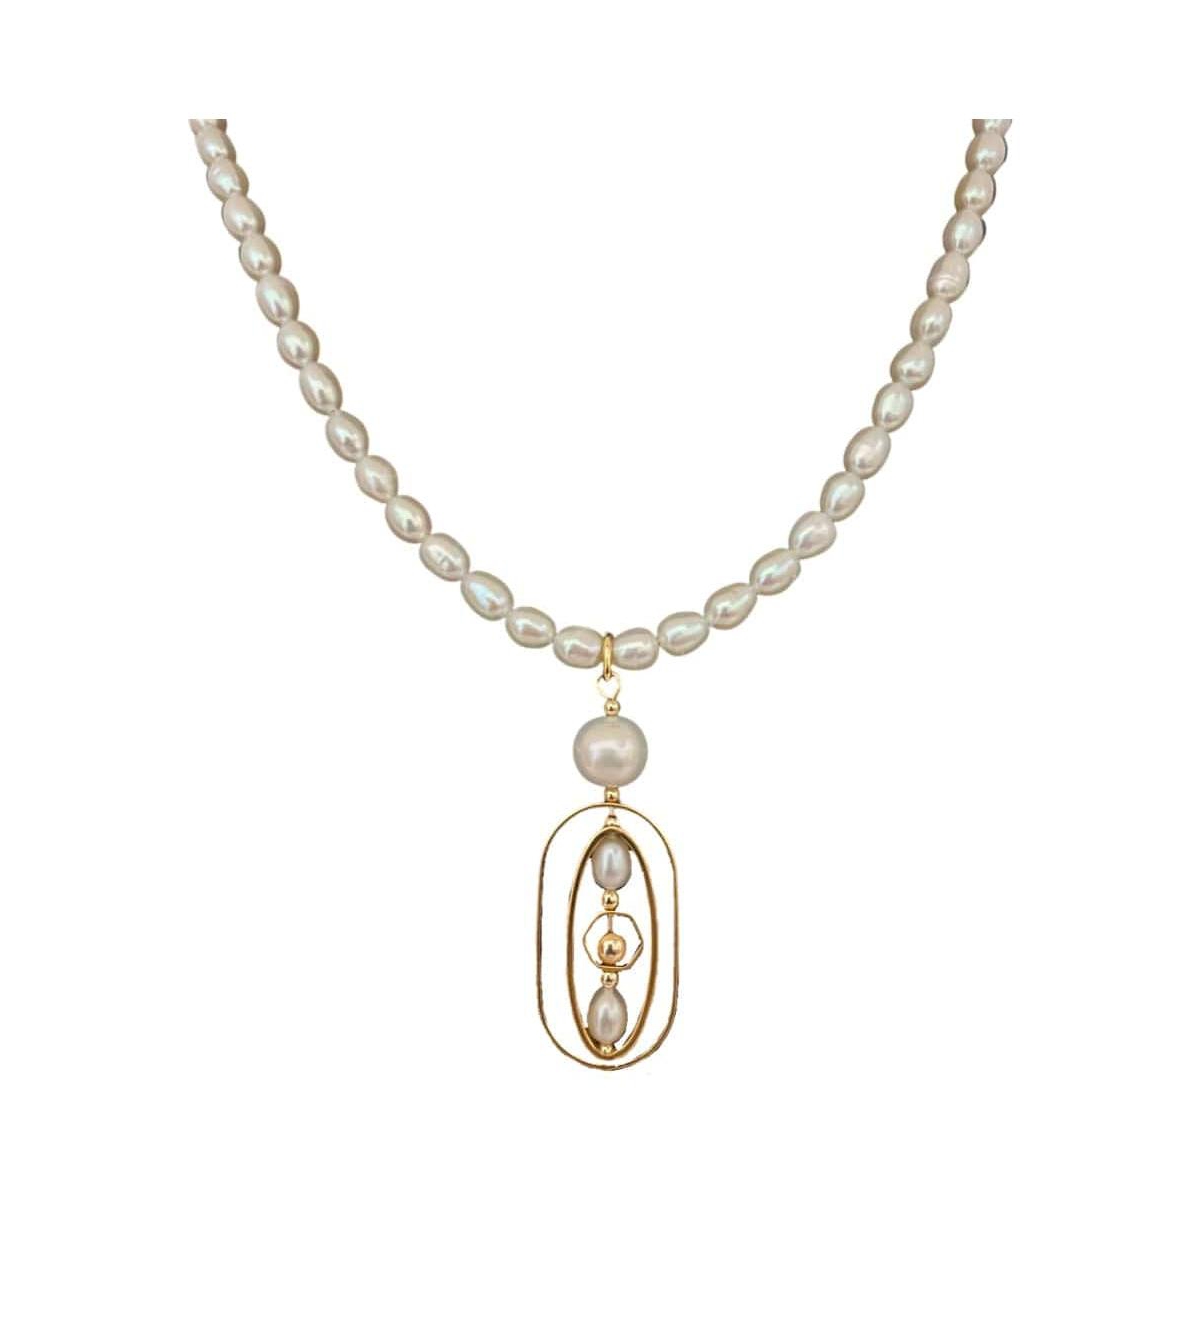 Pearls Geometric Pendant Statement Necklace - White and gold